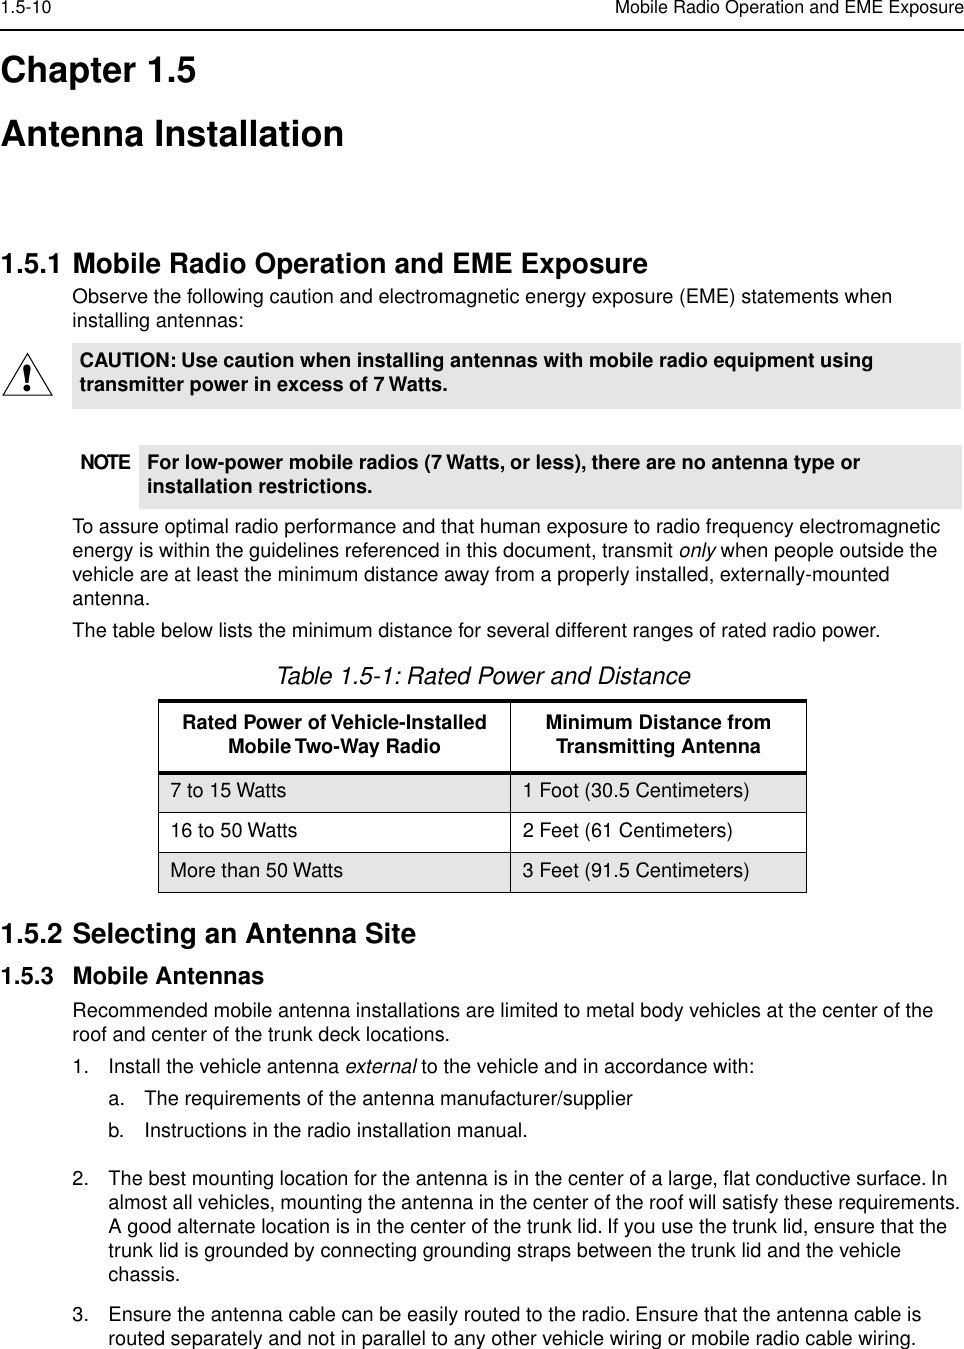  1.5-10 Mobile Radio Operation and EME Exposure Chapter 1.5Antenna Installation 1.5.1 Mobile Radio Operation and EME Exposure Observe the following caution and electromagnetic energy exposure (EME) statements when installing antennas:To assure optimal radio performance and that human exposure to radio frequency electromagnetic energy is within the guidelines referenced in this document, transmit  only  when people outside the vehicle are at least the minimum distance away from a properly installed, externally-mounted antenna.The table below lists the minimum distance for several different ranges of rated radio power. 1.5.2 Selecting an Antenna Site 1.5.3 Mobile Antennas Recommended mobile antenna installations are limited to metal body vehicles at the center of the roof and center of the trunk deck locations.1. Install the vehicle antenna  external  to the vehicle and in accordance with:a. The requirements of the antenna manufacturer/supplierb. Instructions in the radio installation manual.2. The best mounting location for the antenna is in the center of a large, ﬂat conductive surface. In almost all vehicles, mounting the antenna in the center of the roof will satisfy these requirements. A good alternate location is in the center of the trunk lid. If you use the trunk lid, ensure that the trunk lid is grounded by connecting grounding straps between the trunk lid and the vehicle chassis.3. Ensure the antenna cable can be easily routed to the radio. Ensure that the antenna cable is routed separately and not in parallel to any other vehicle wiring or mobile radio cable wiring. CAUTION: Use caution when installing antennas with mobile radio equipment using transmitter power in excess of 7 Watts.NOTE For low-power mobile radios (7 Watts, or less), there are no antenna type or installation restrictions. Table 1.5-1: Rated Power and Distance Rated Power of Vehicle-Installed Mobile Two-Way Radio Minimum Distance from Transmitting Antenna 7 to 15 Watts 1 Foot (30.5 Centimeters)16 to 50 Watts 2 Feet (61 Centimeters)More than 50 Watts 3 Feet (91.5 Centimeters)!